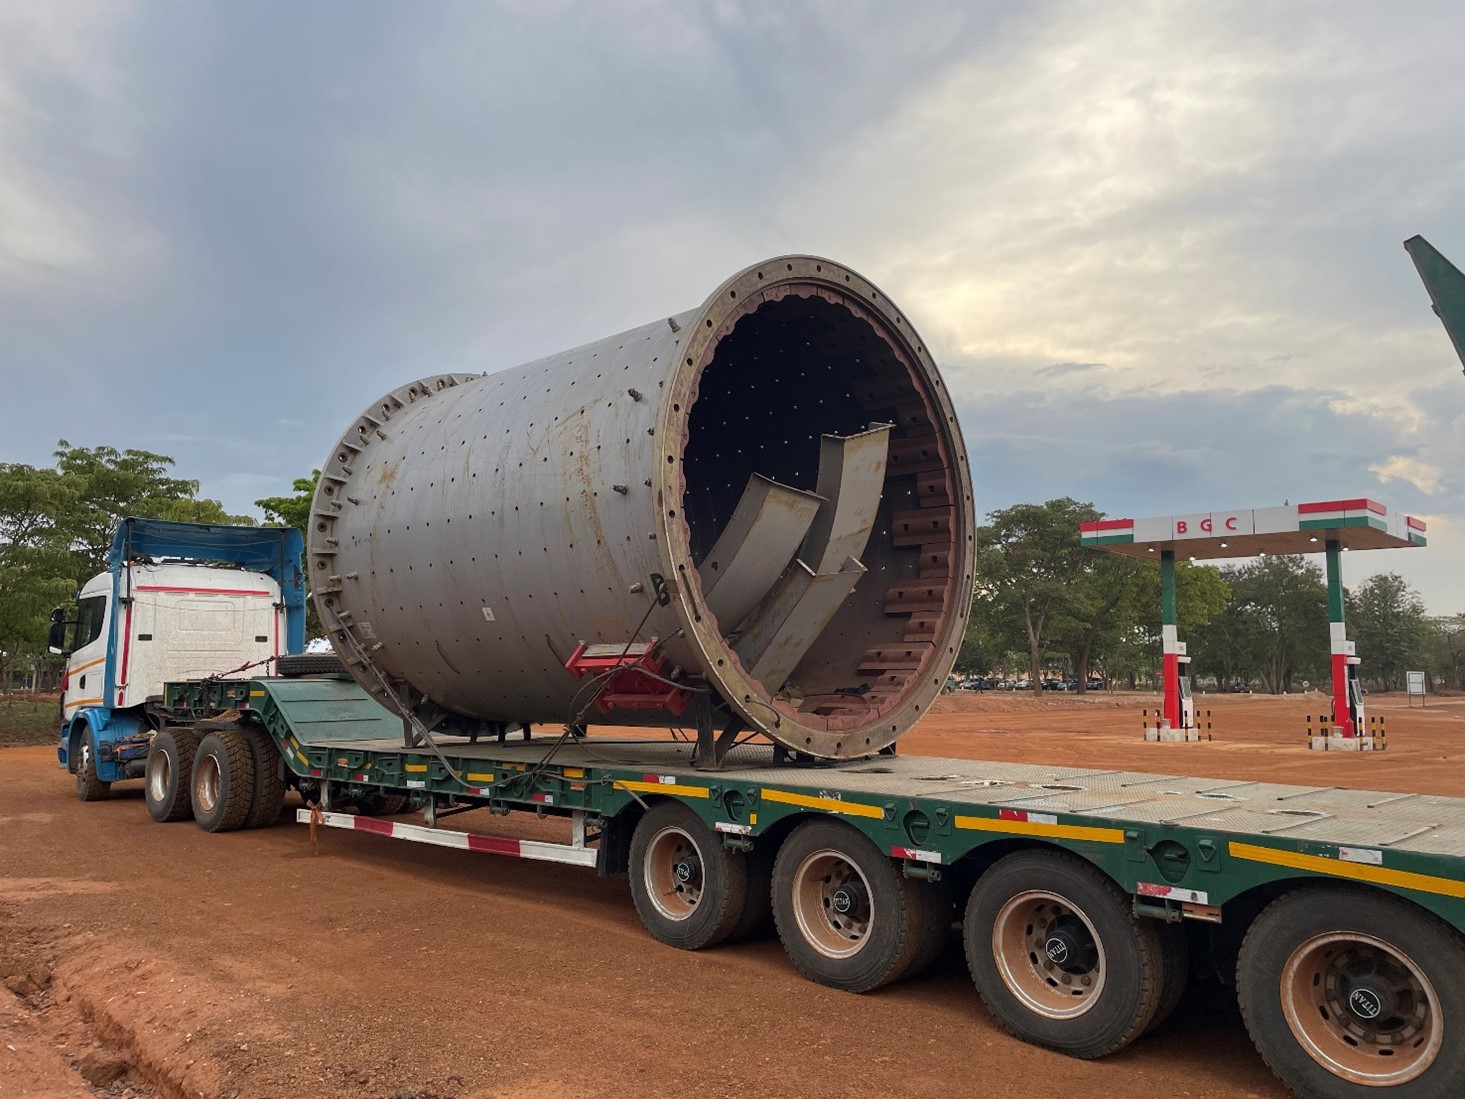 The new 1,000 tpd ball mill arriving at Buckreef Gold